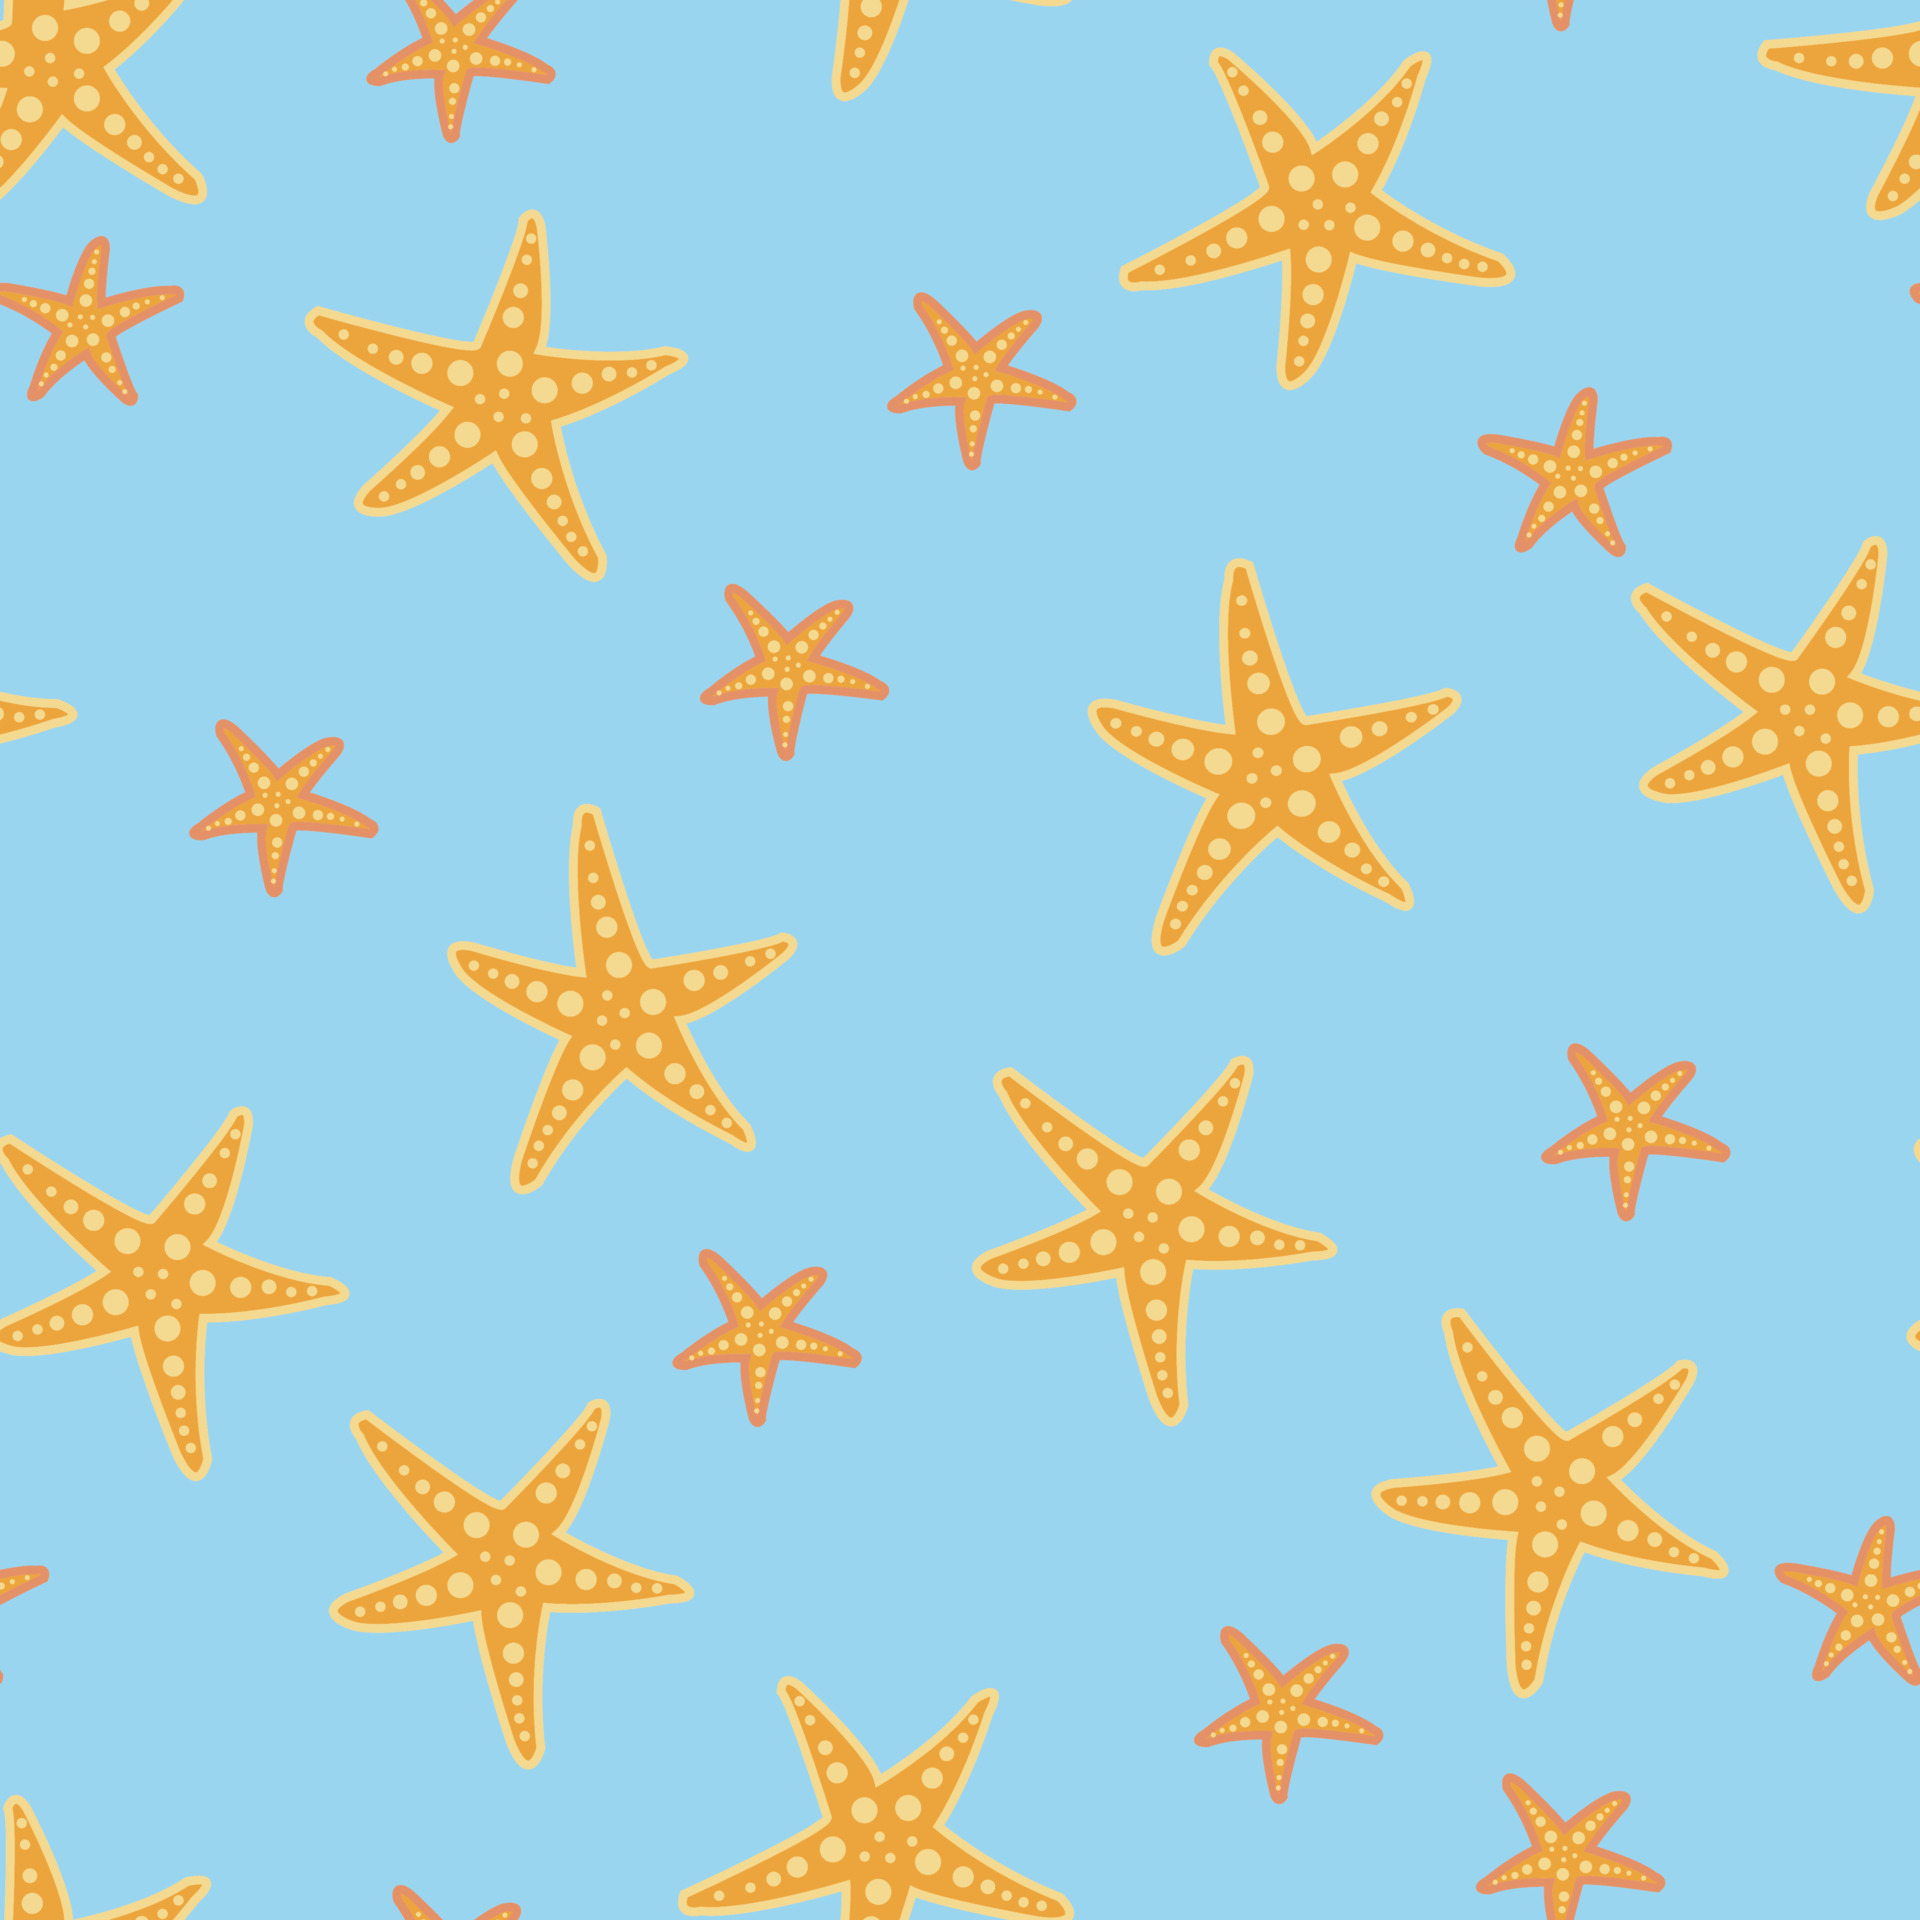 1920x1920 Seamless pattern of scattered starfish yellow stars on a light blue textured background. 4790835 Vector Art